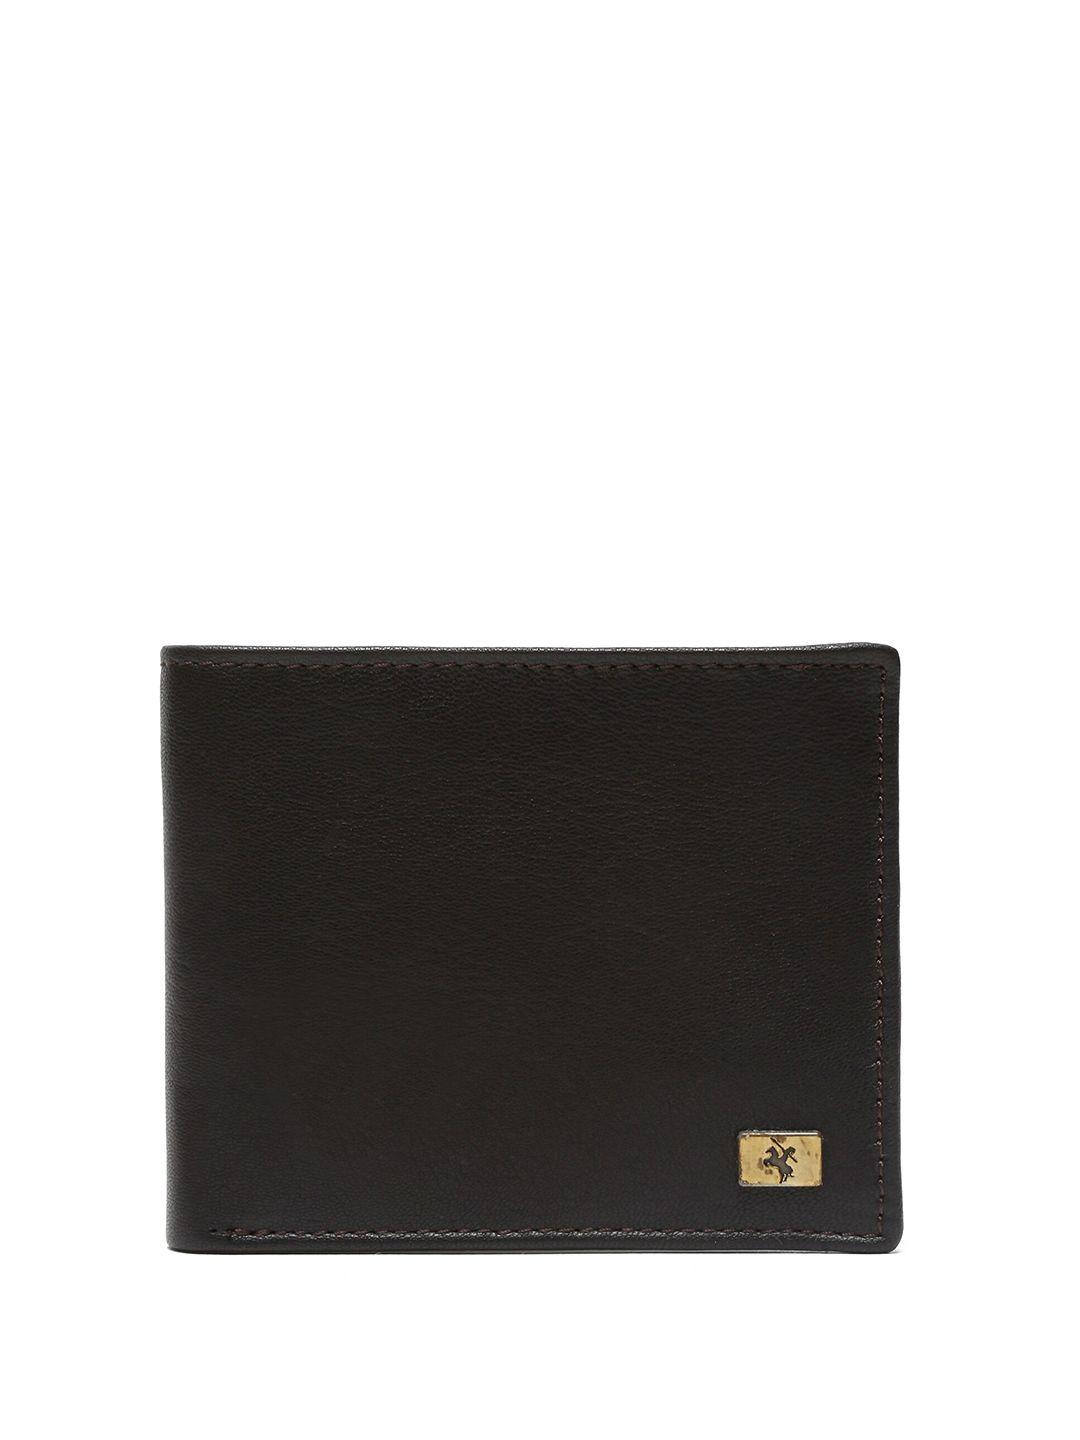 cantabil brown leather two fold wallet